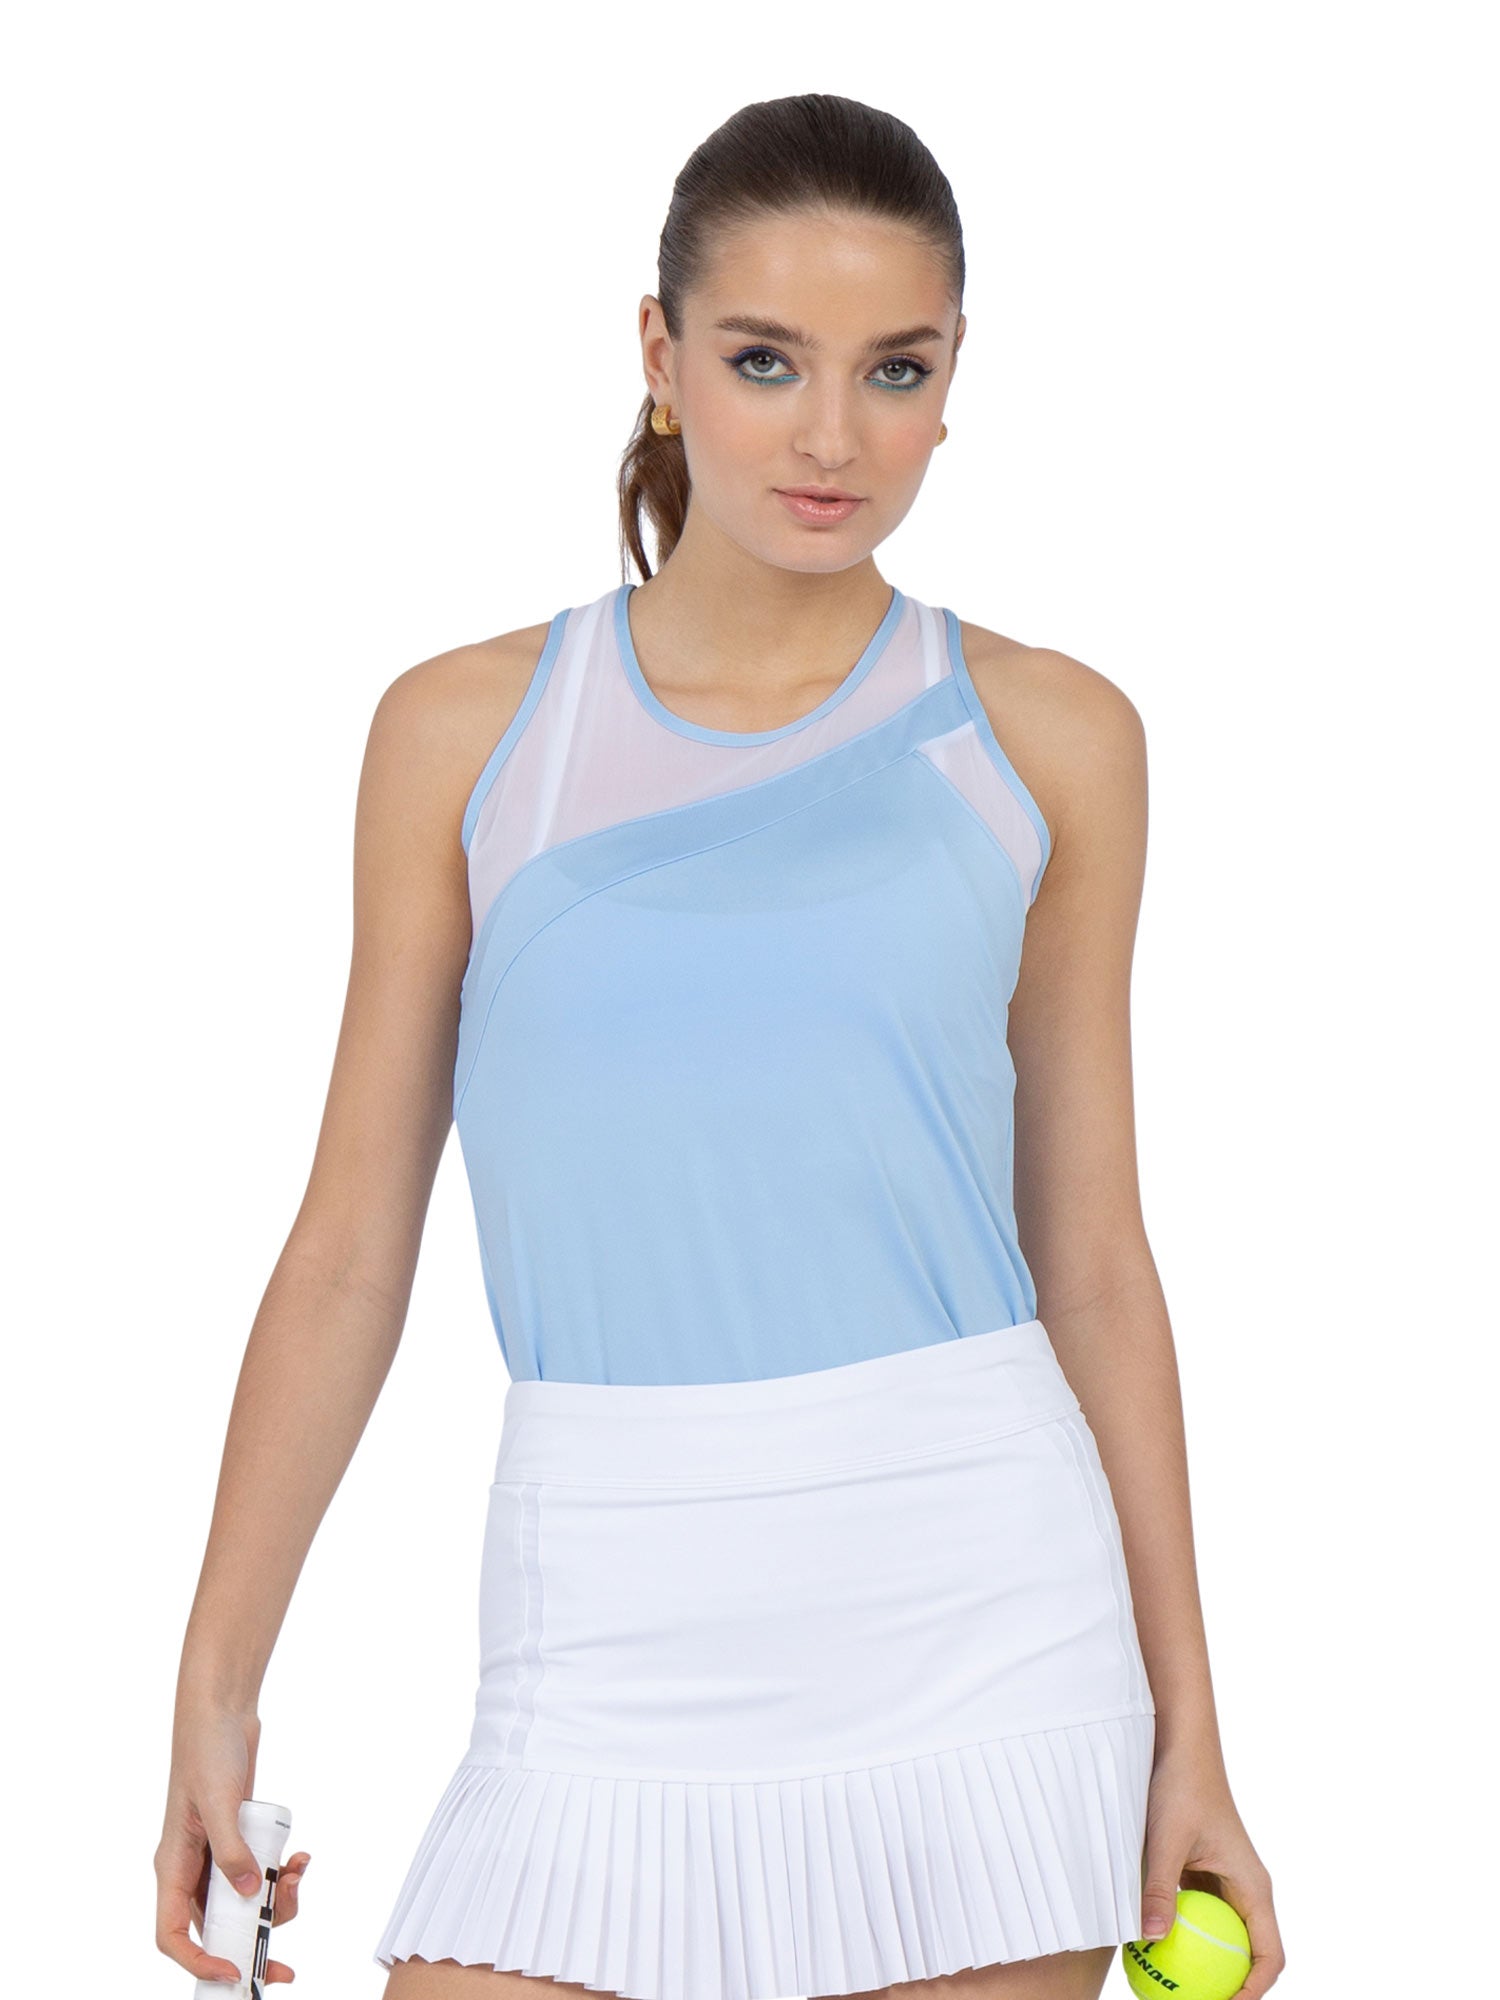 Front view of model wearing the Emma tank in bluebell by inPhorm NYC with her hands at her side holding a tennis ball and a tennis racket